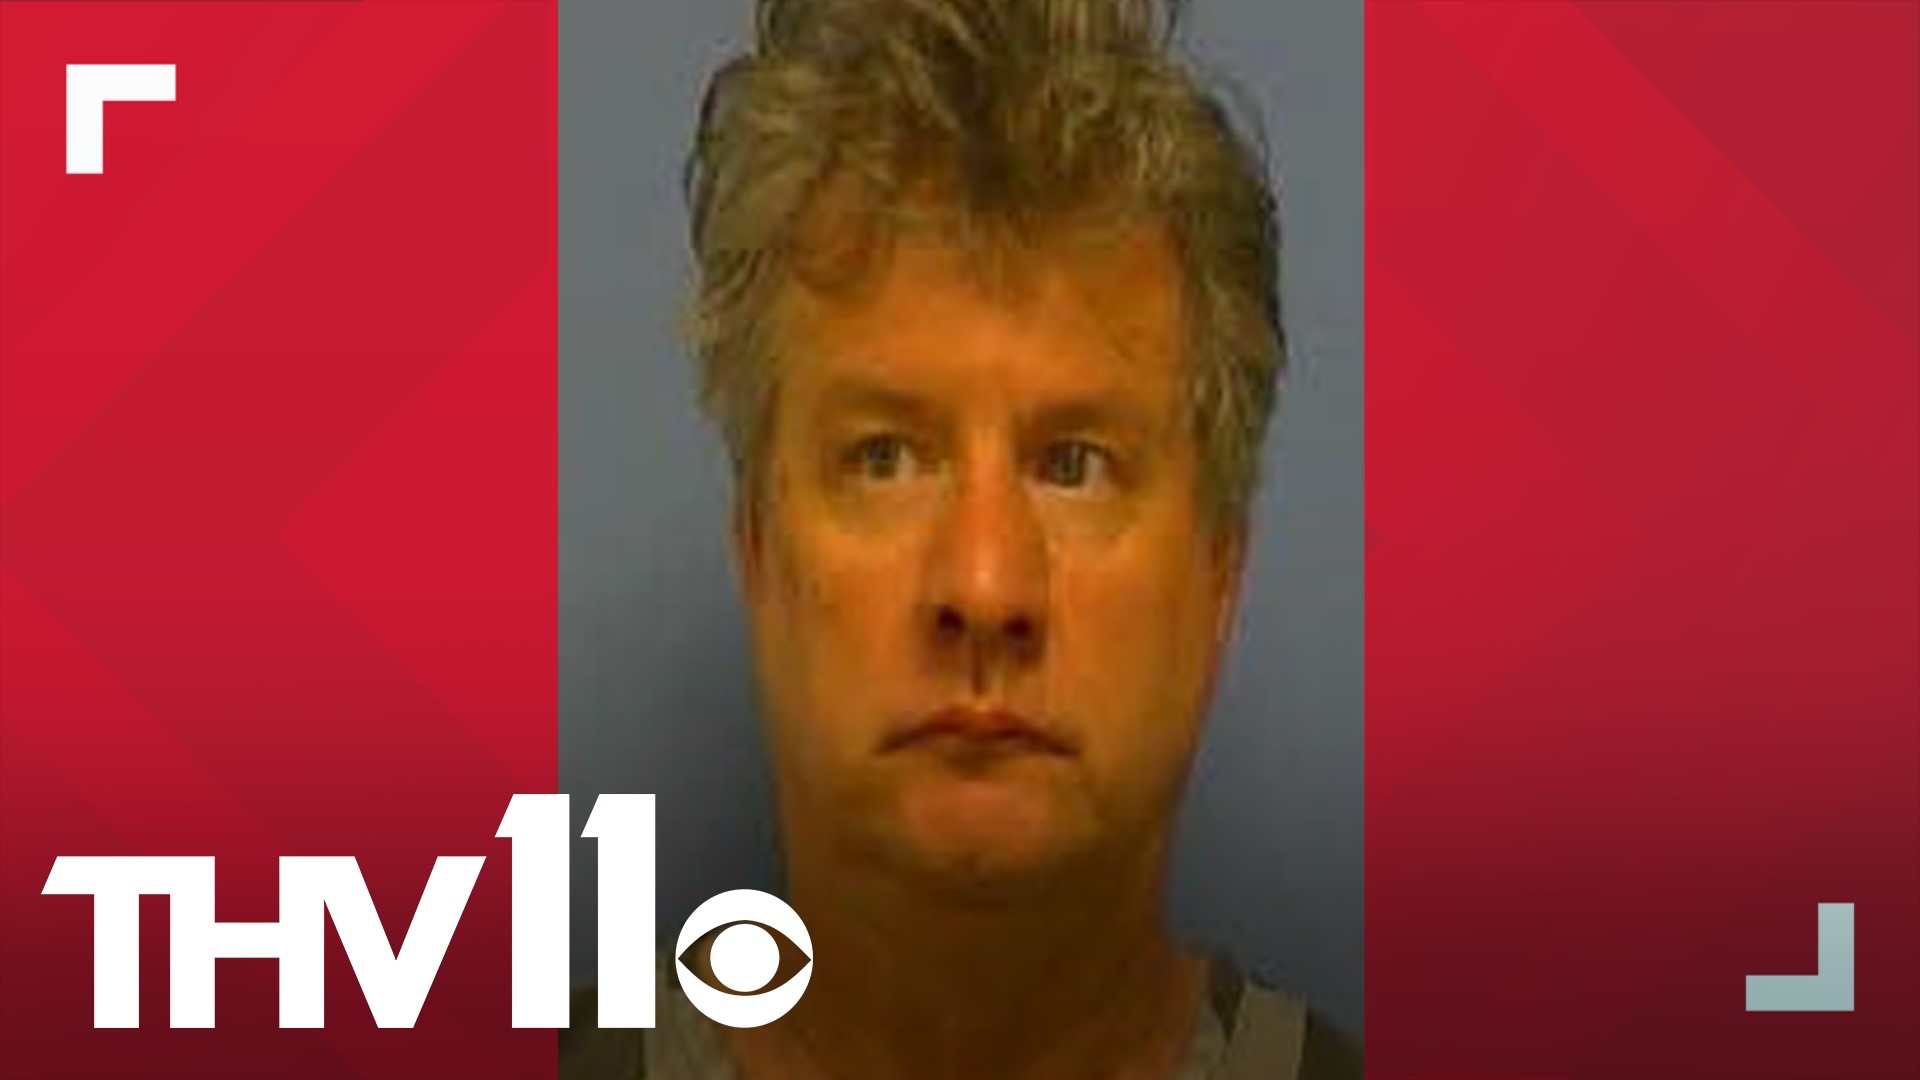 Benton man charged with possession of child sexual abuse material thv11 image pic